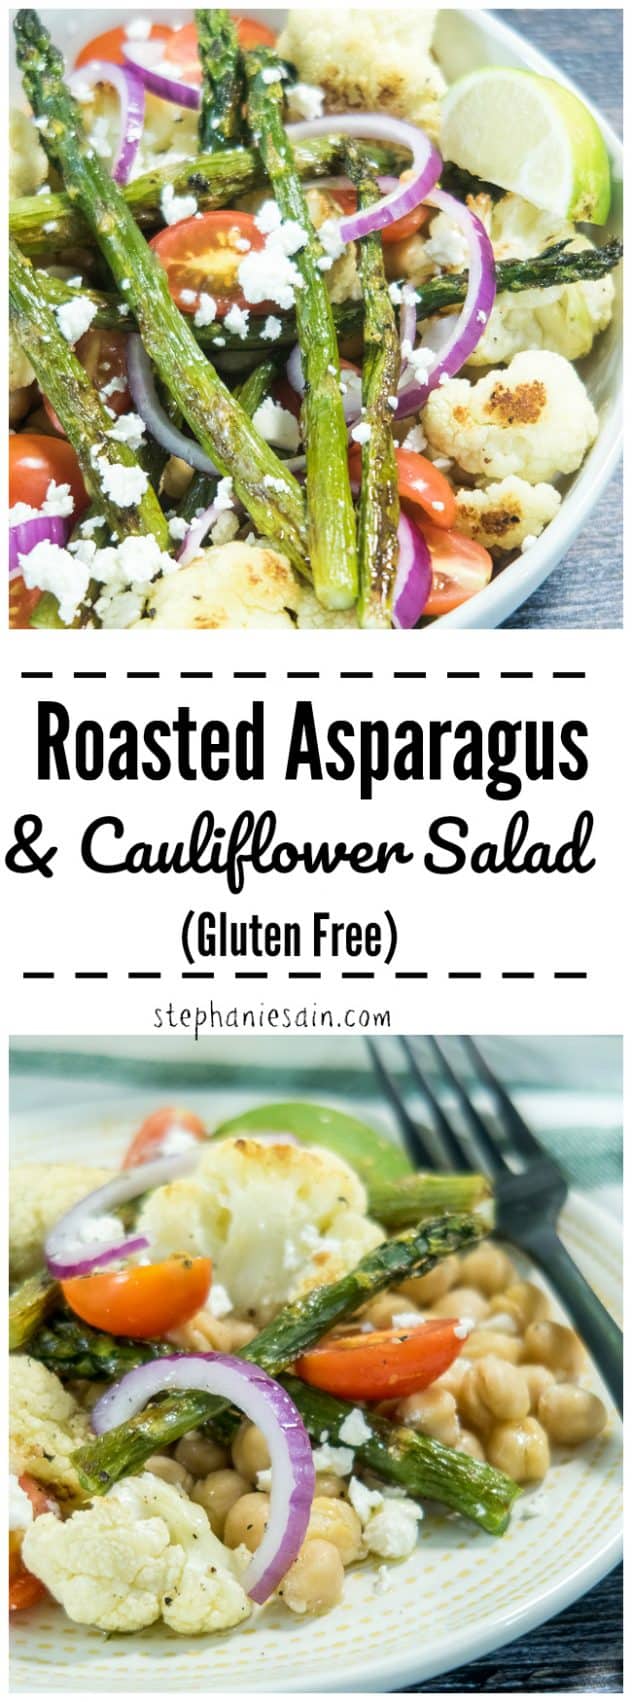 This Roasted Asparagus & Cauliflower Salad is made with tender roasted asparagus, & cauliflower all topped on a bed of chickpeas, tomatoes, & onions. Lightly dressed with lime. An easy one bowl dinner perfect for a quick summer time meal. Gluten Free.